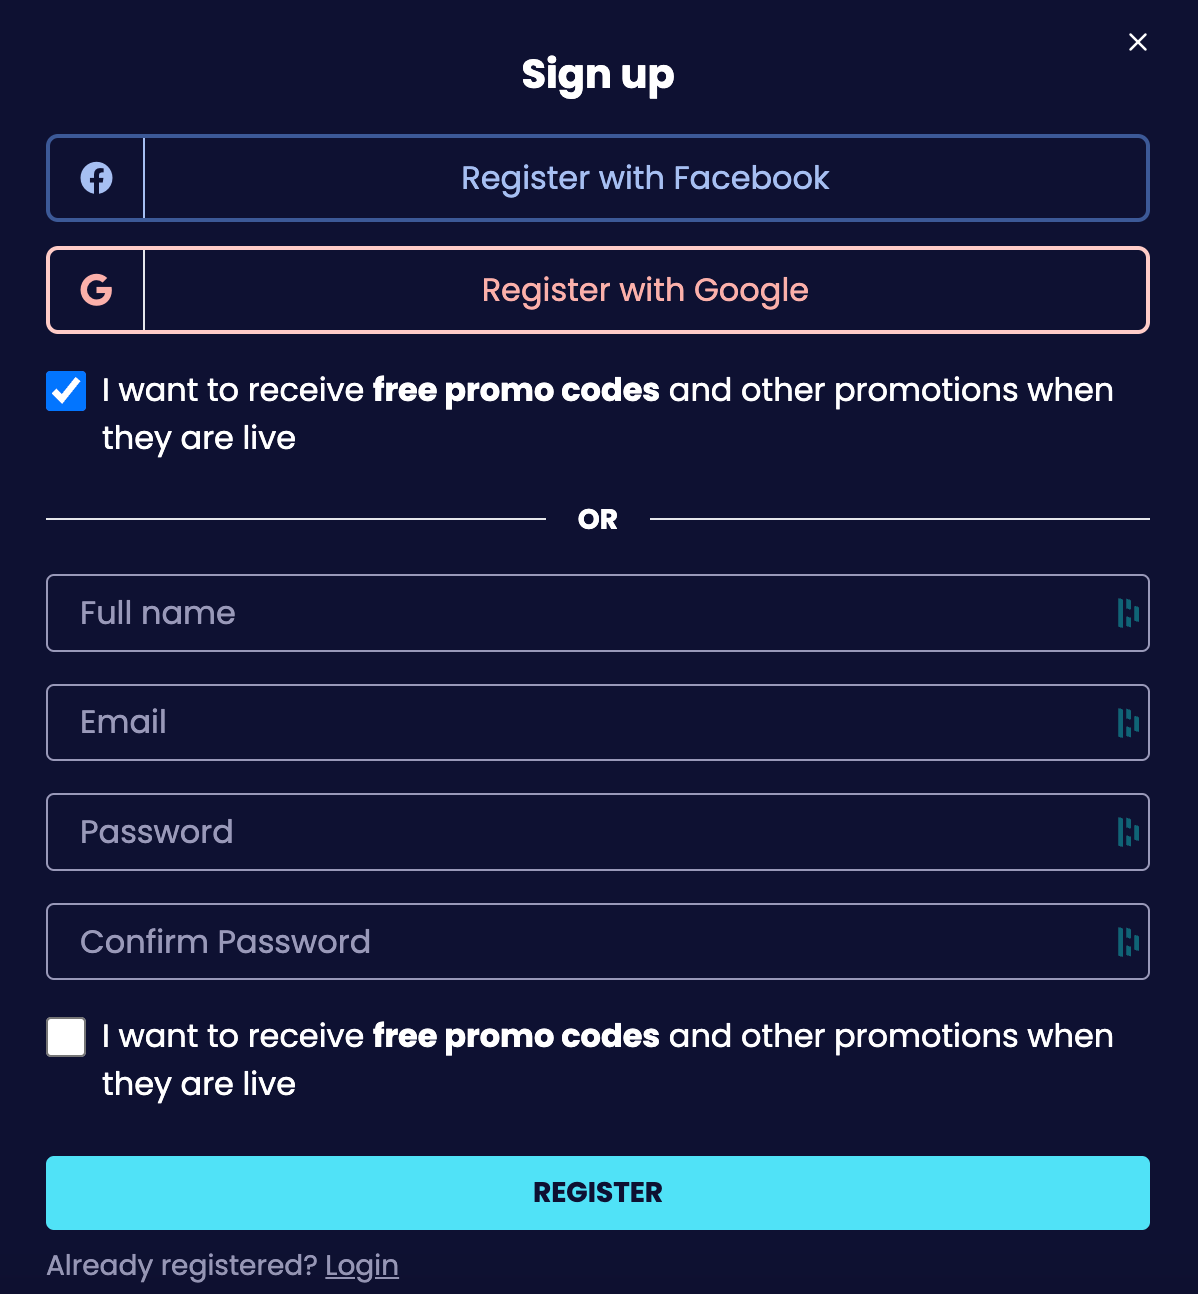 Jemlit's Sign Up Page Reviewed